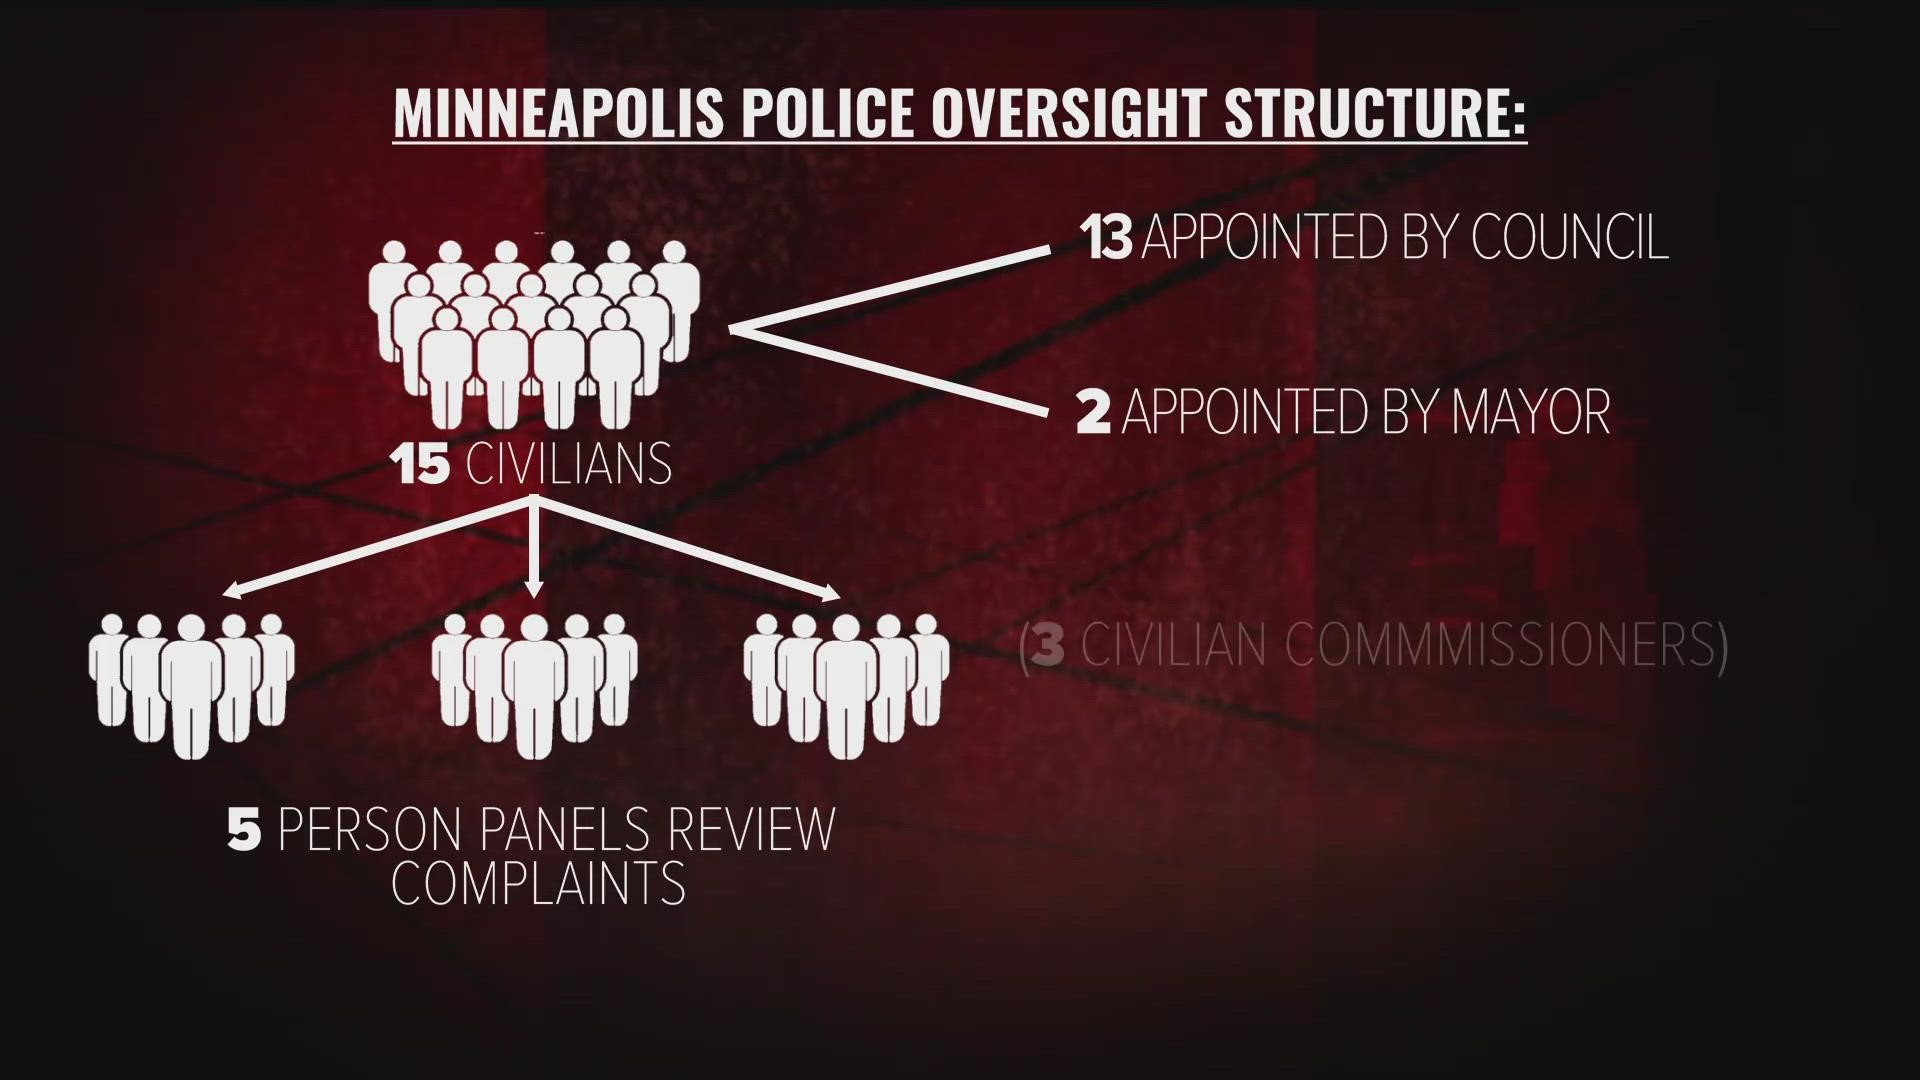 The new police oversight commission will take effect in April, although some critics say the changes don't go far enough.